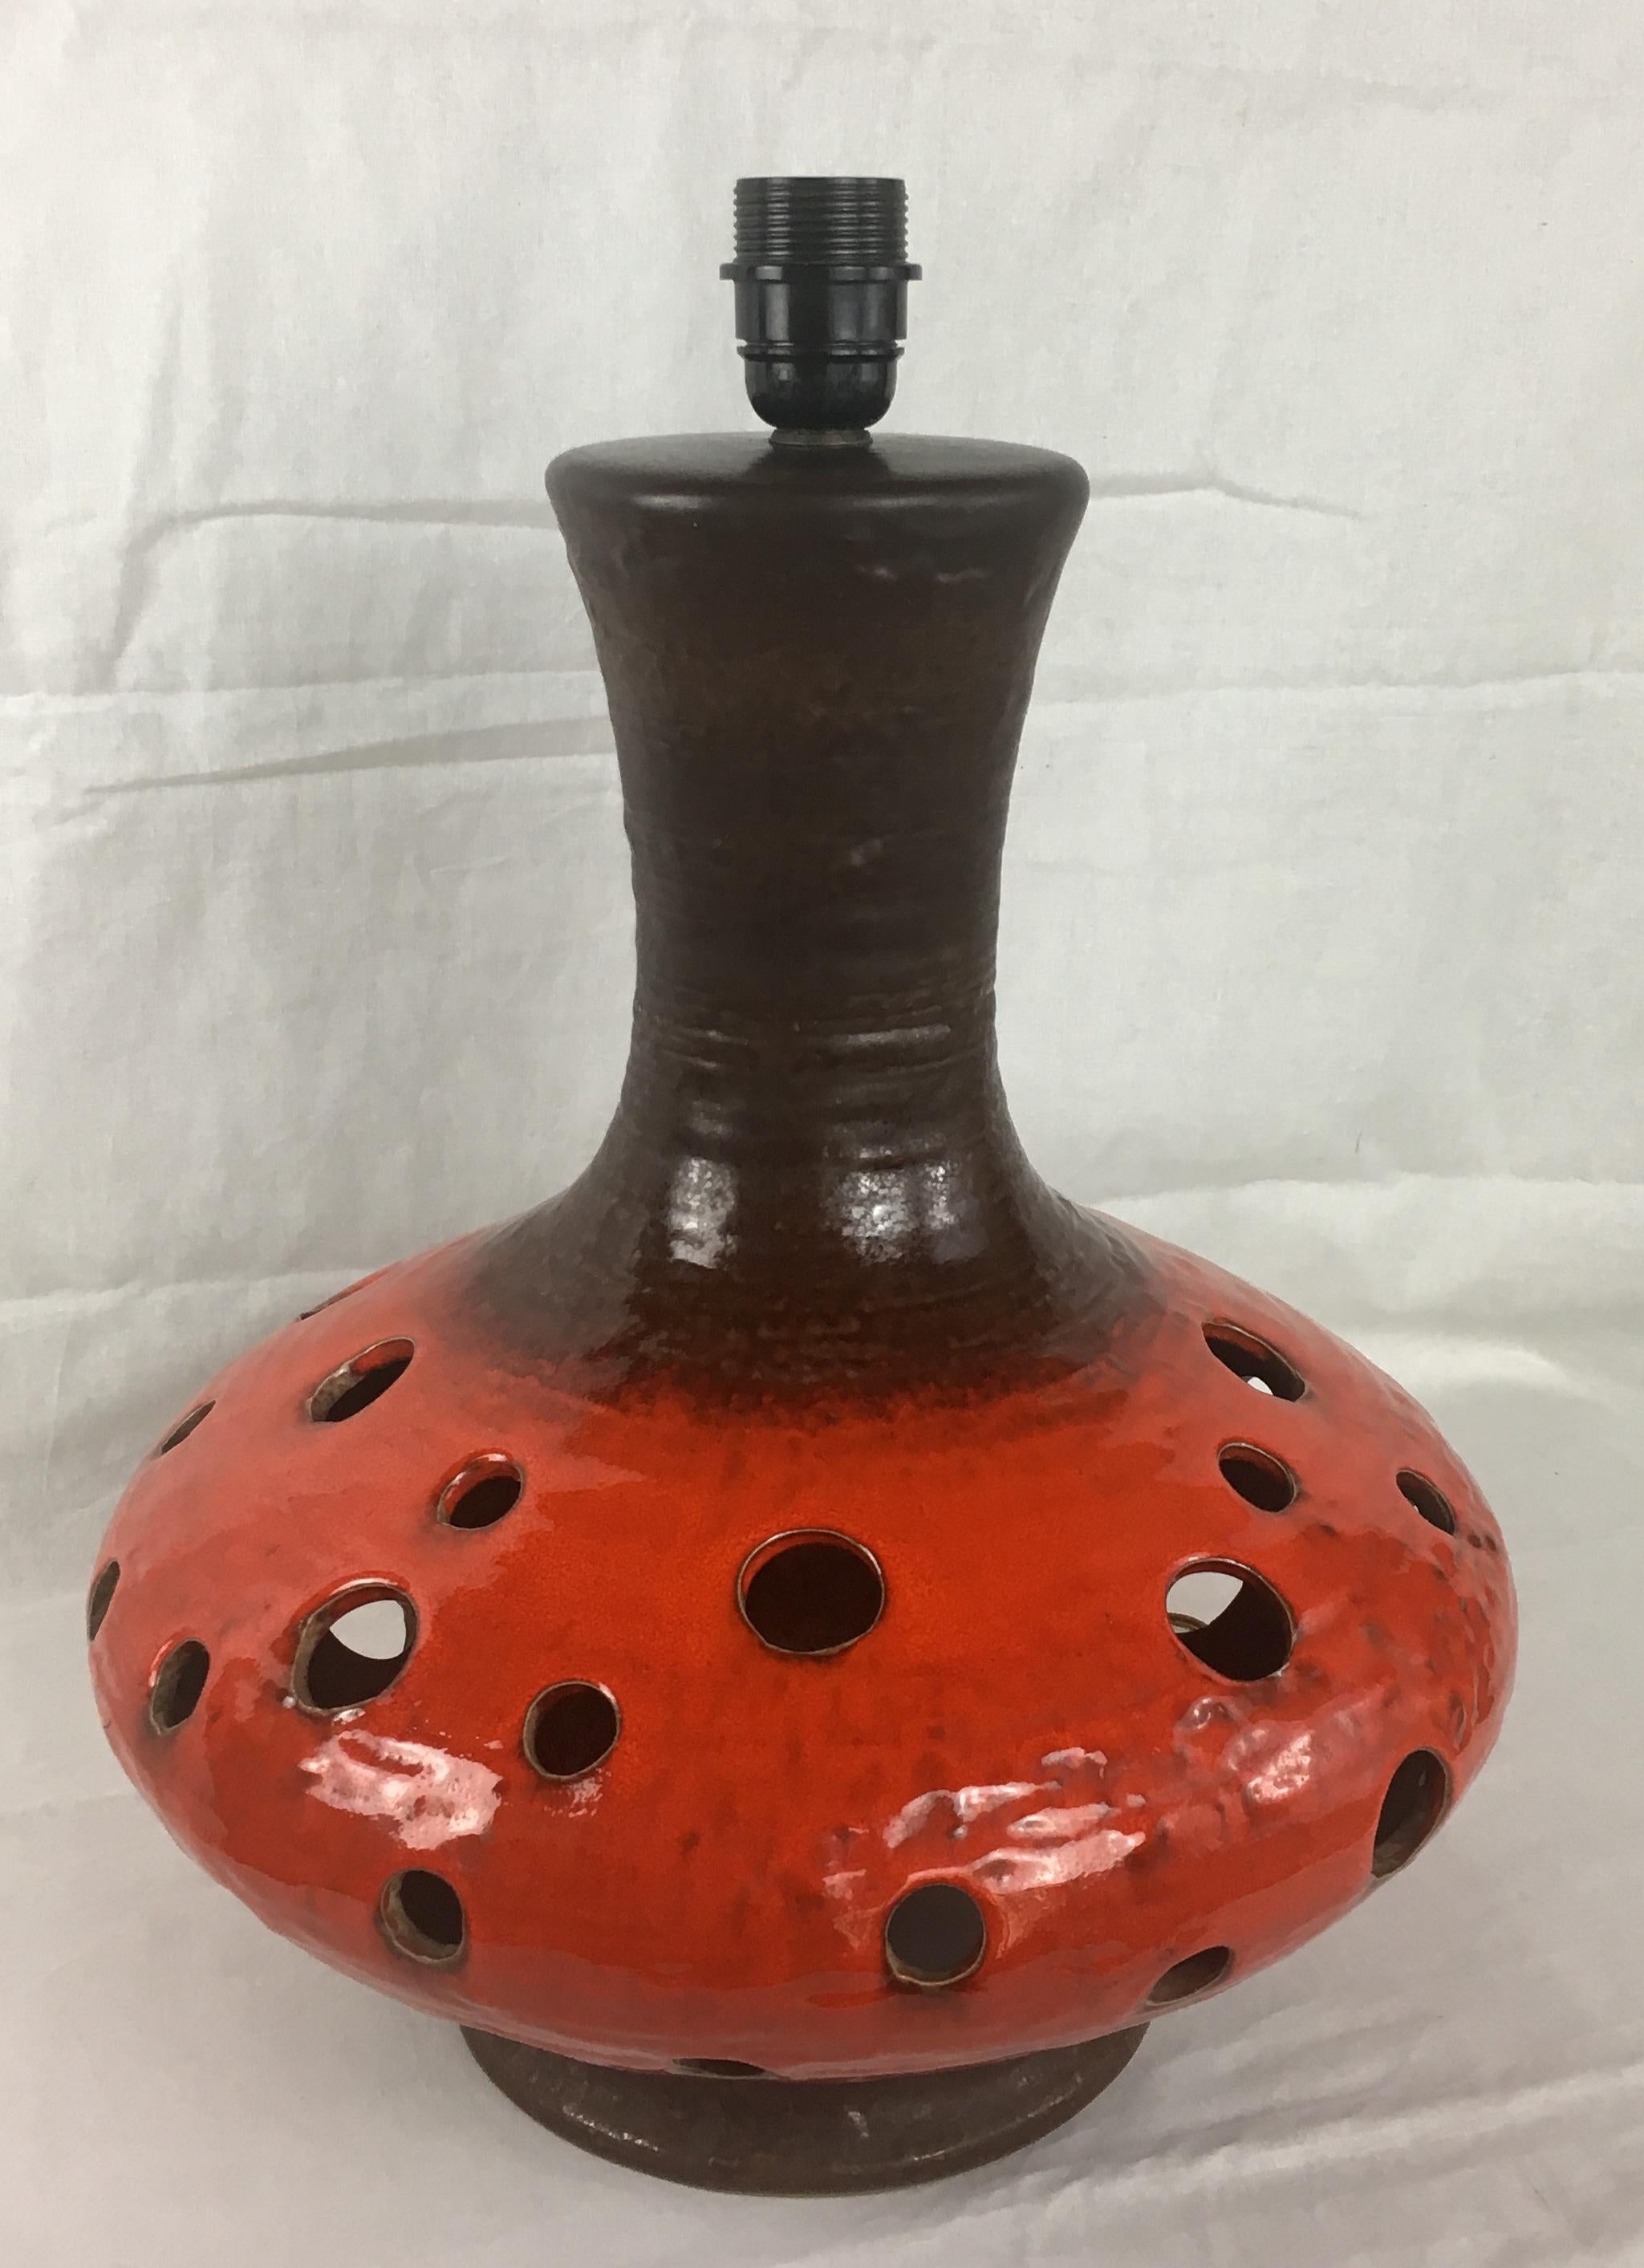 Very decorative and large midcentury table lamp attributed to Georges Pelletier, France made from ceramics and finished in eye catching burnt orange and brown hues. 

The multicolored base combined with the classical shade has many very attractive